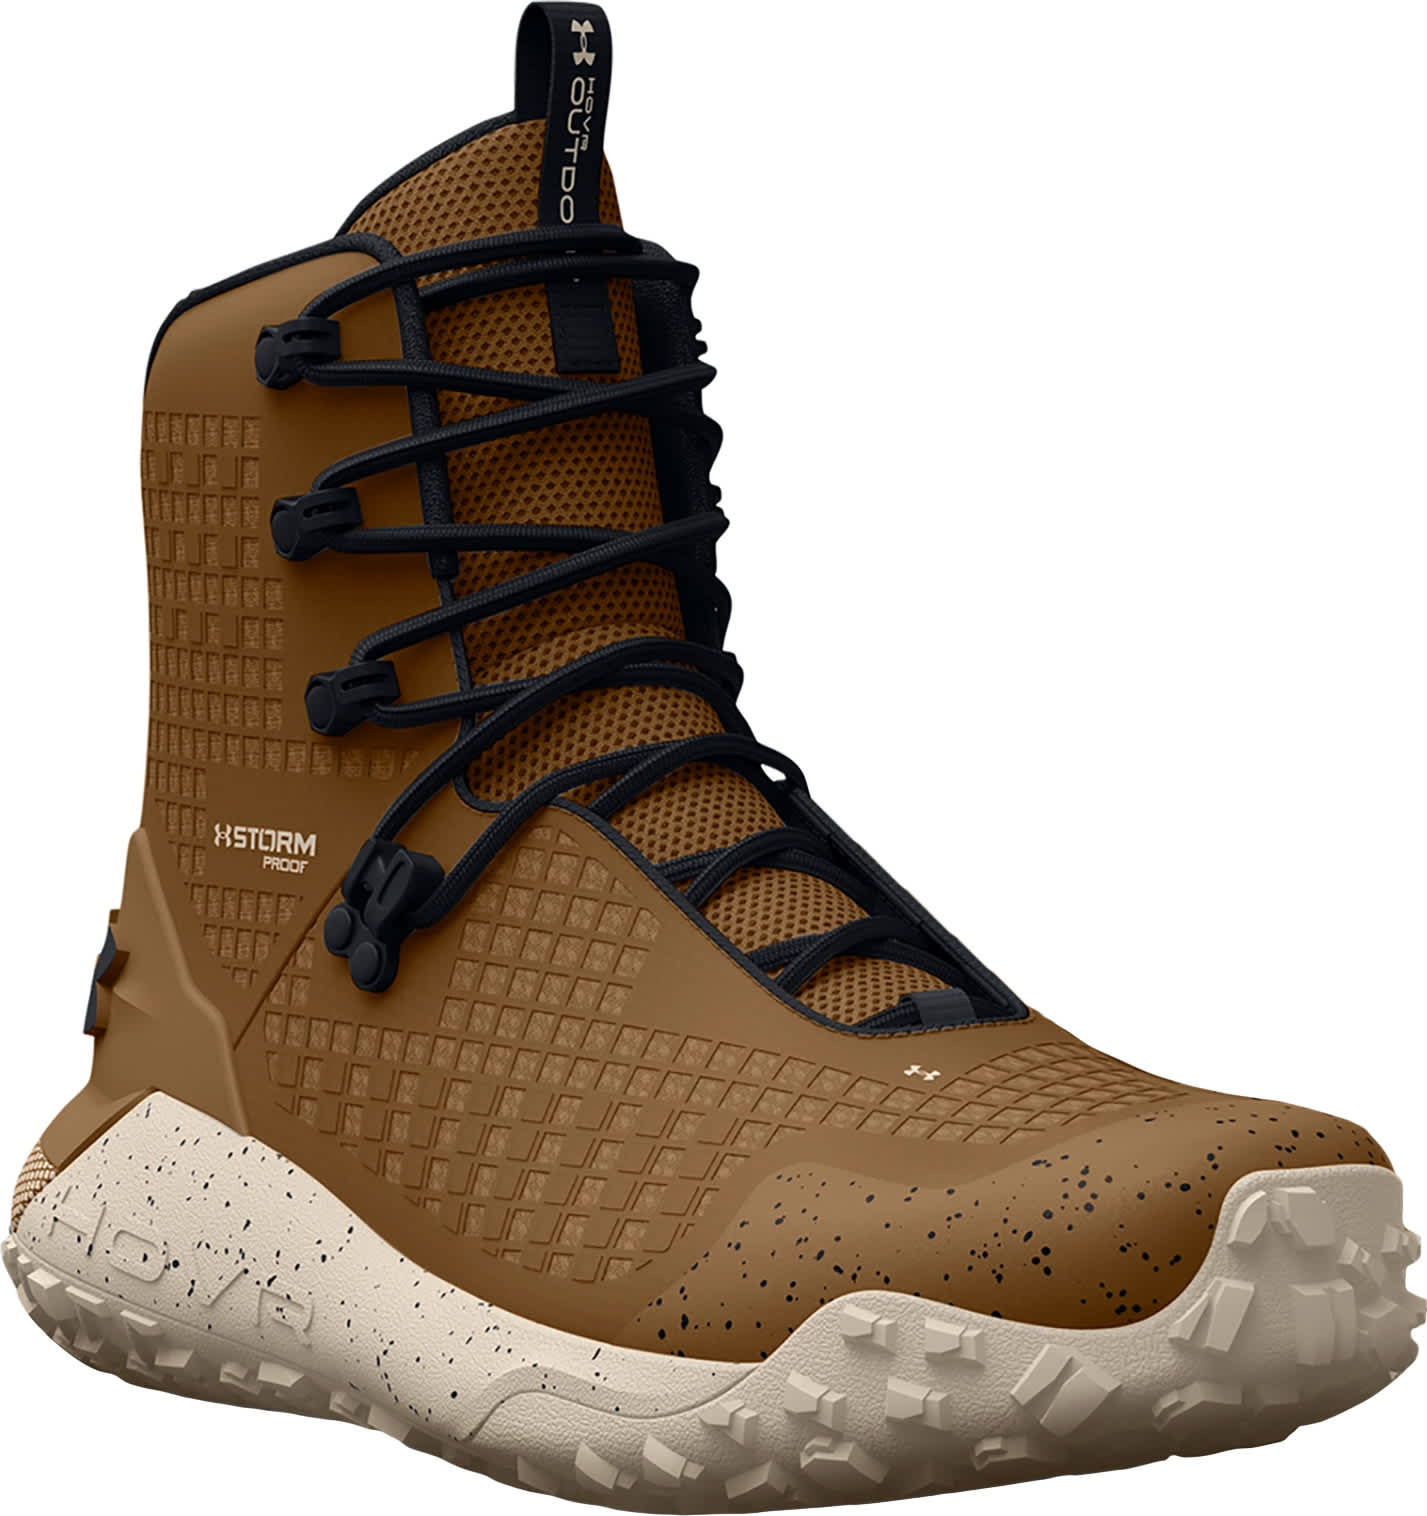 Under Armour® Unisex HOVR Dawn 2.0 Waterproof Hunting Boots - Utility Light Brown